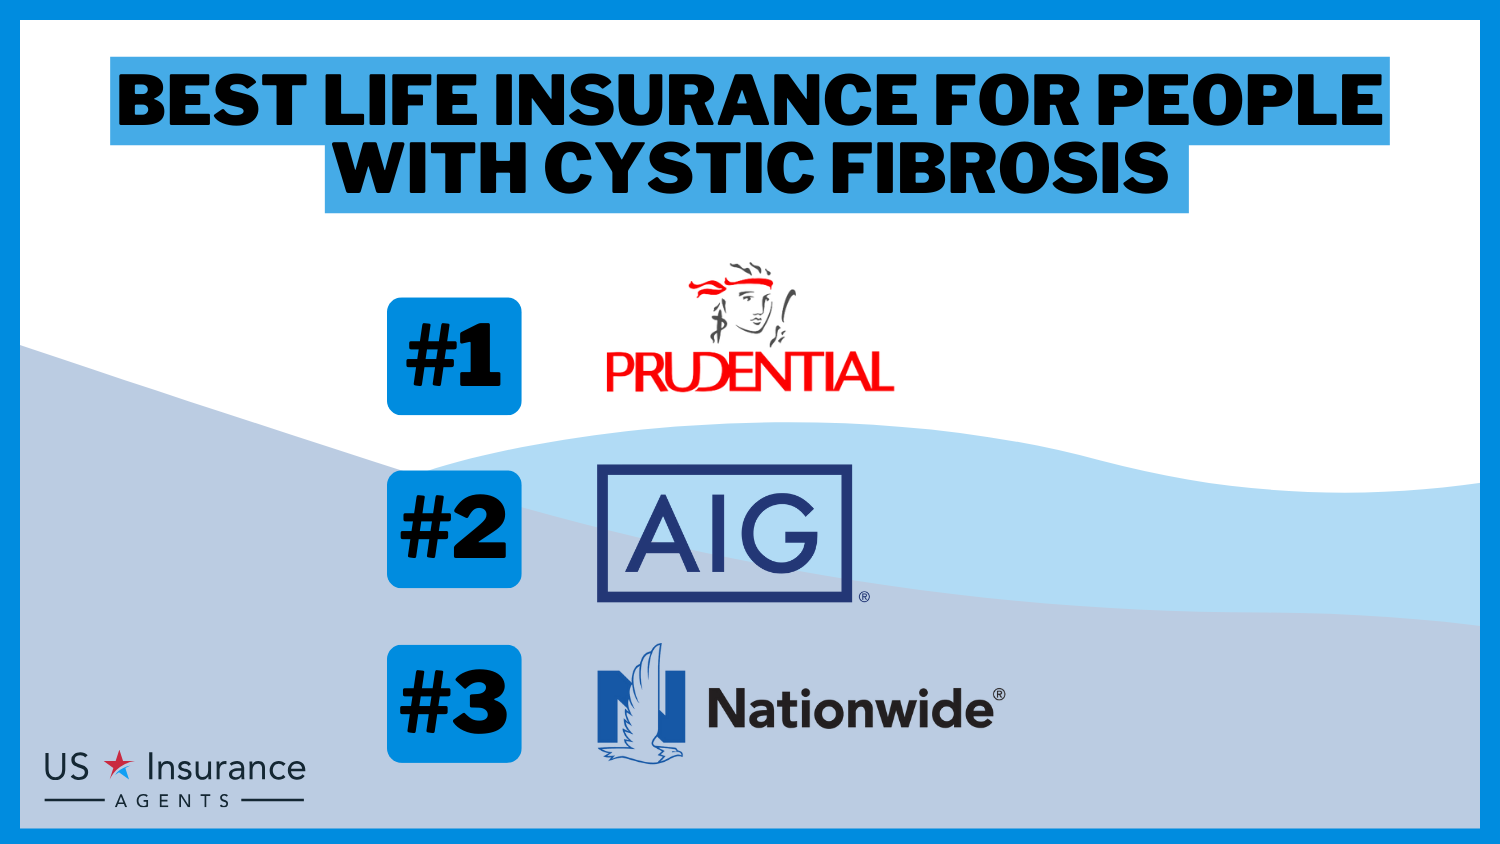 3 Best Life Insurance for People With Cystic Fibrosis: Prudential, AIG, and Nationwide.